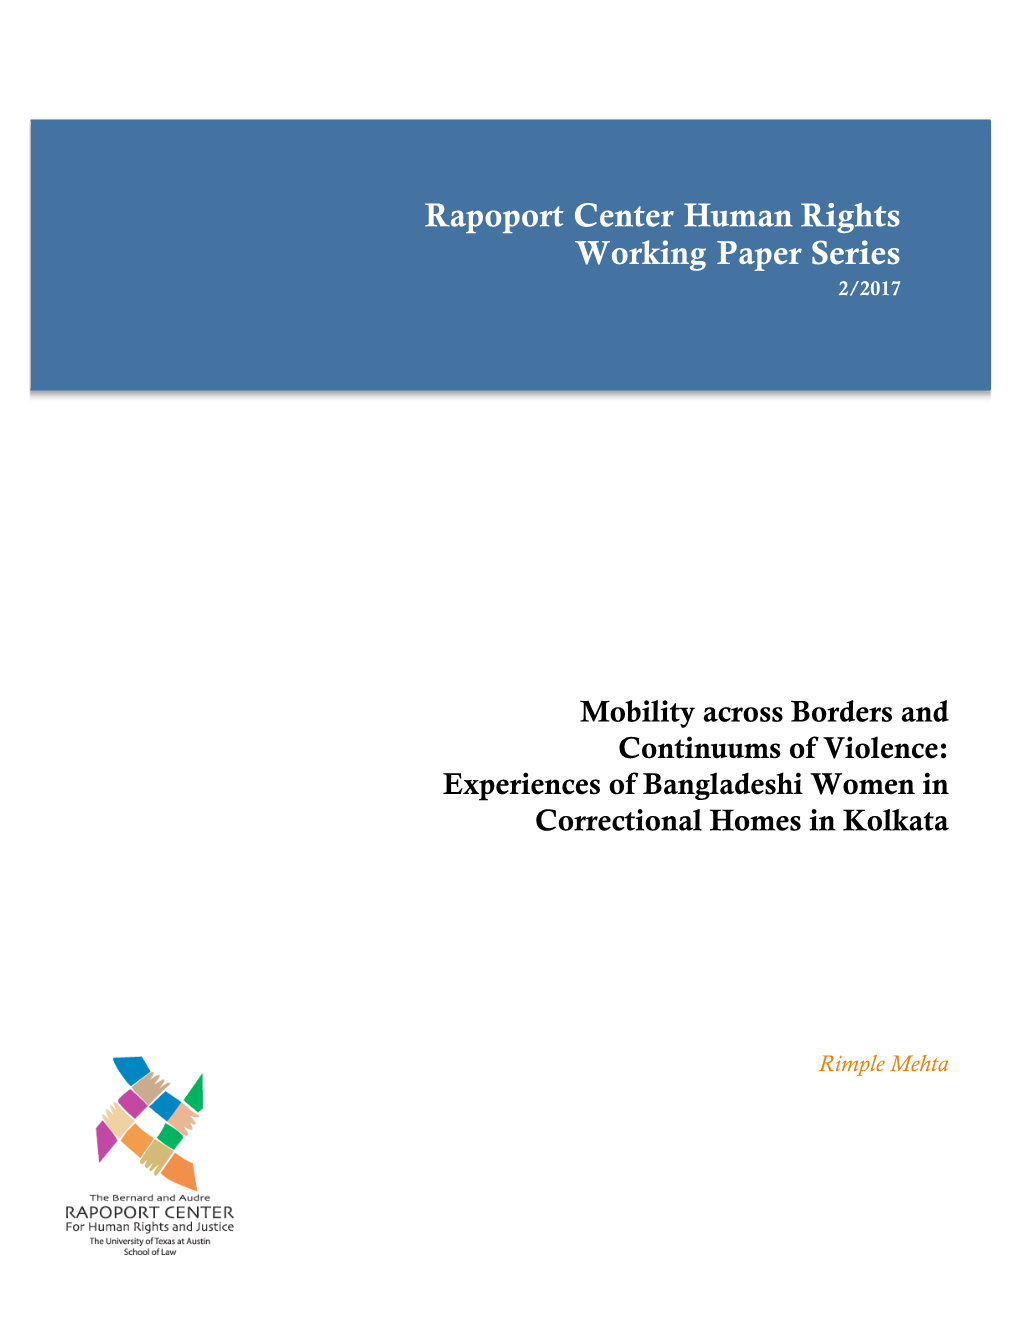 Mobility Across Borders and Continuums of Violence: Experiences of Bangladeshi Women in Correctional Homes in Kolkata